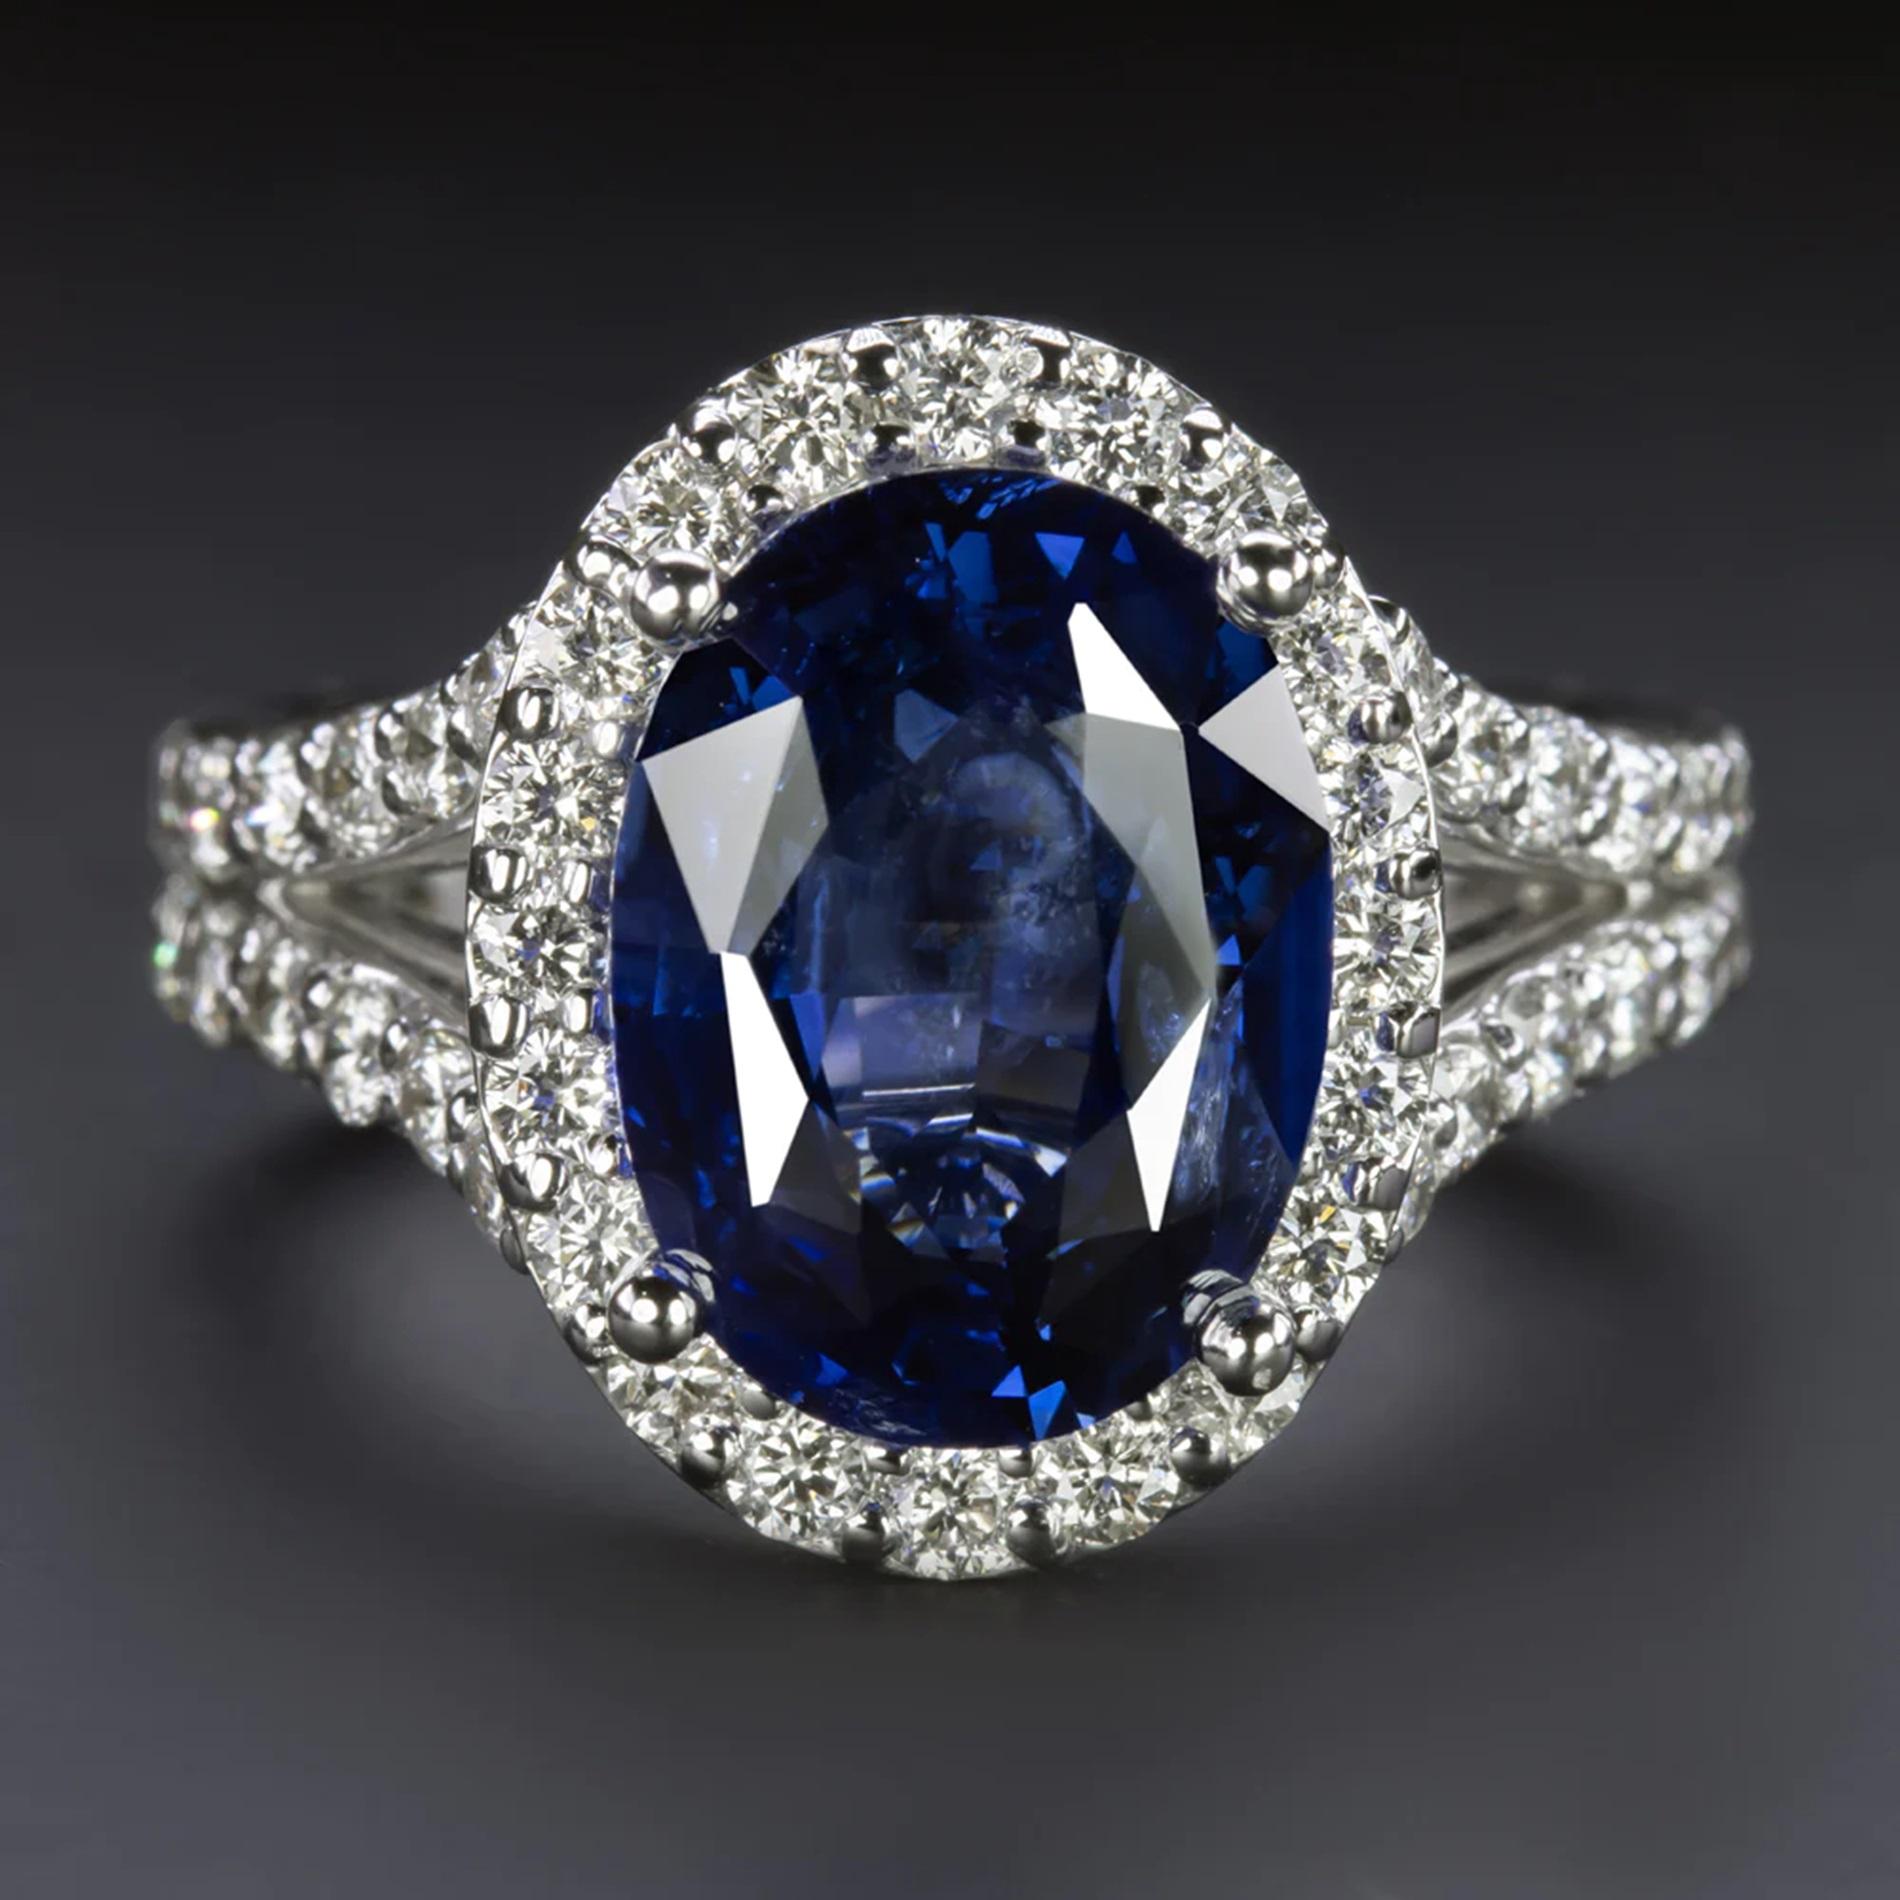 Oval Cut GIA Certified 5.45 Carat Blue Sapphire Diamond Ring For Sale